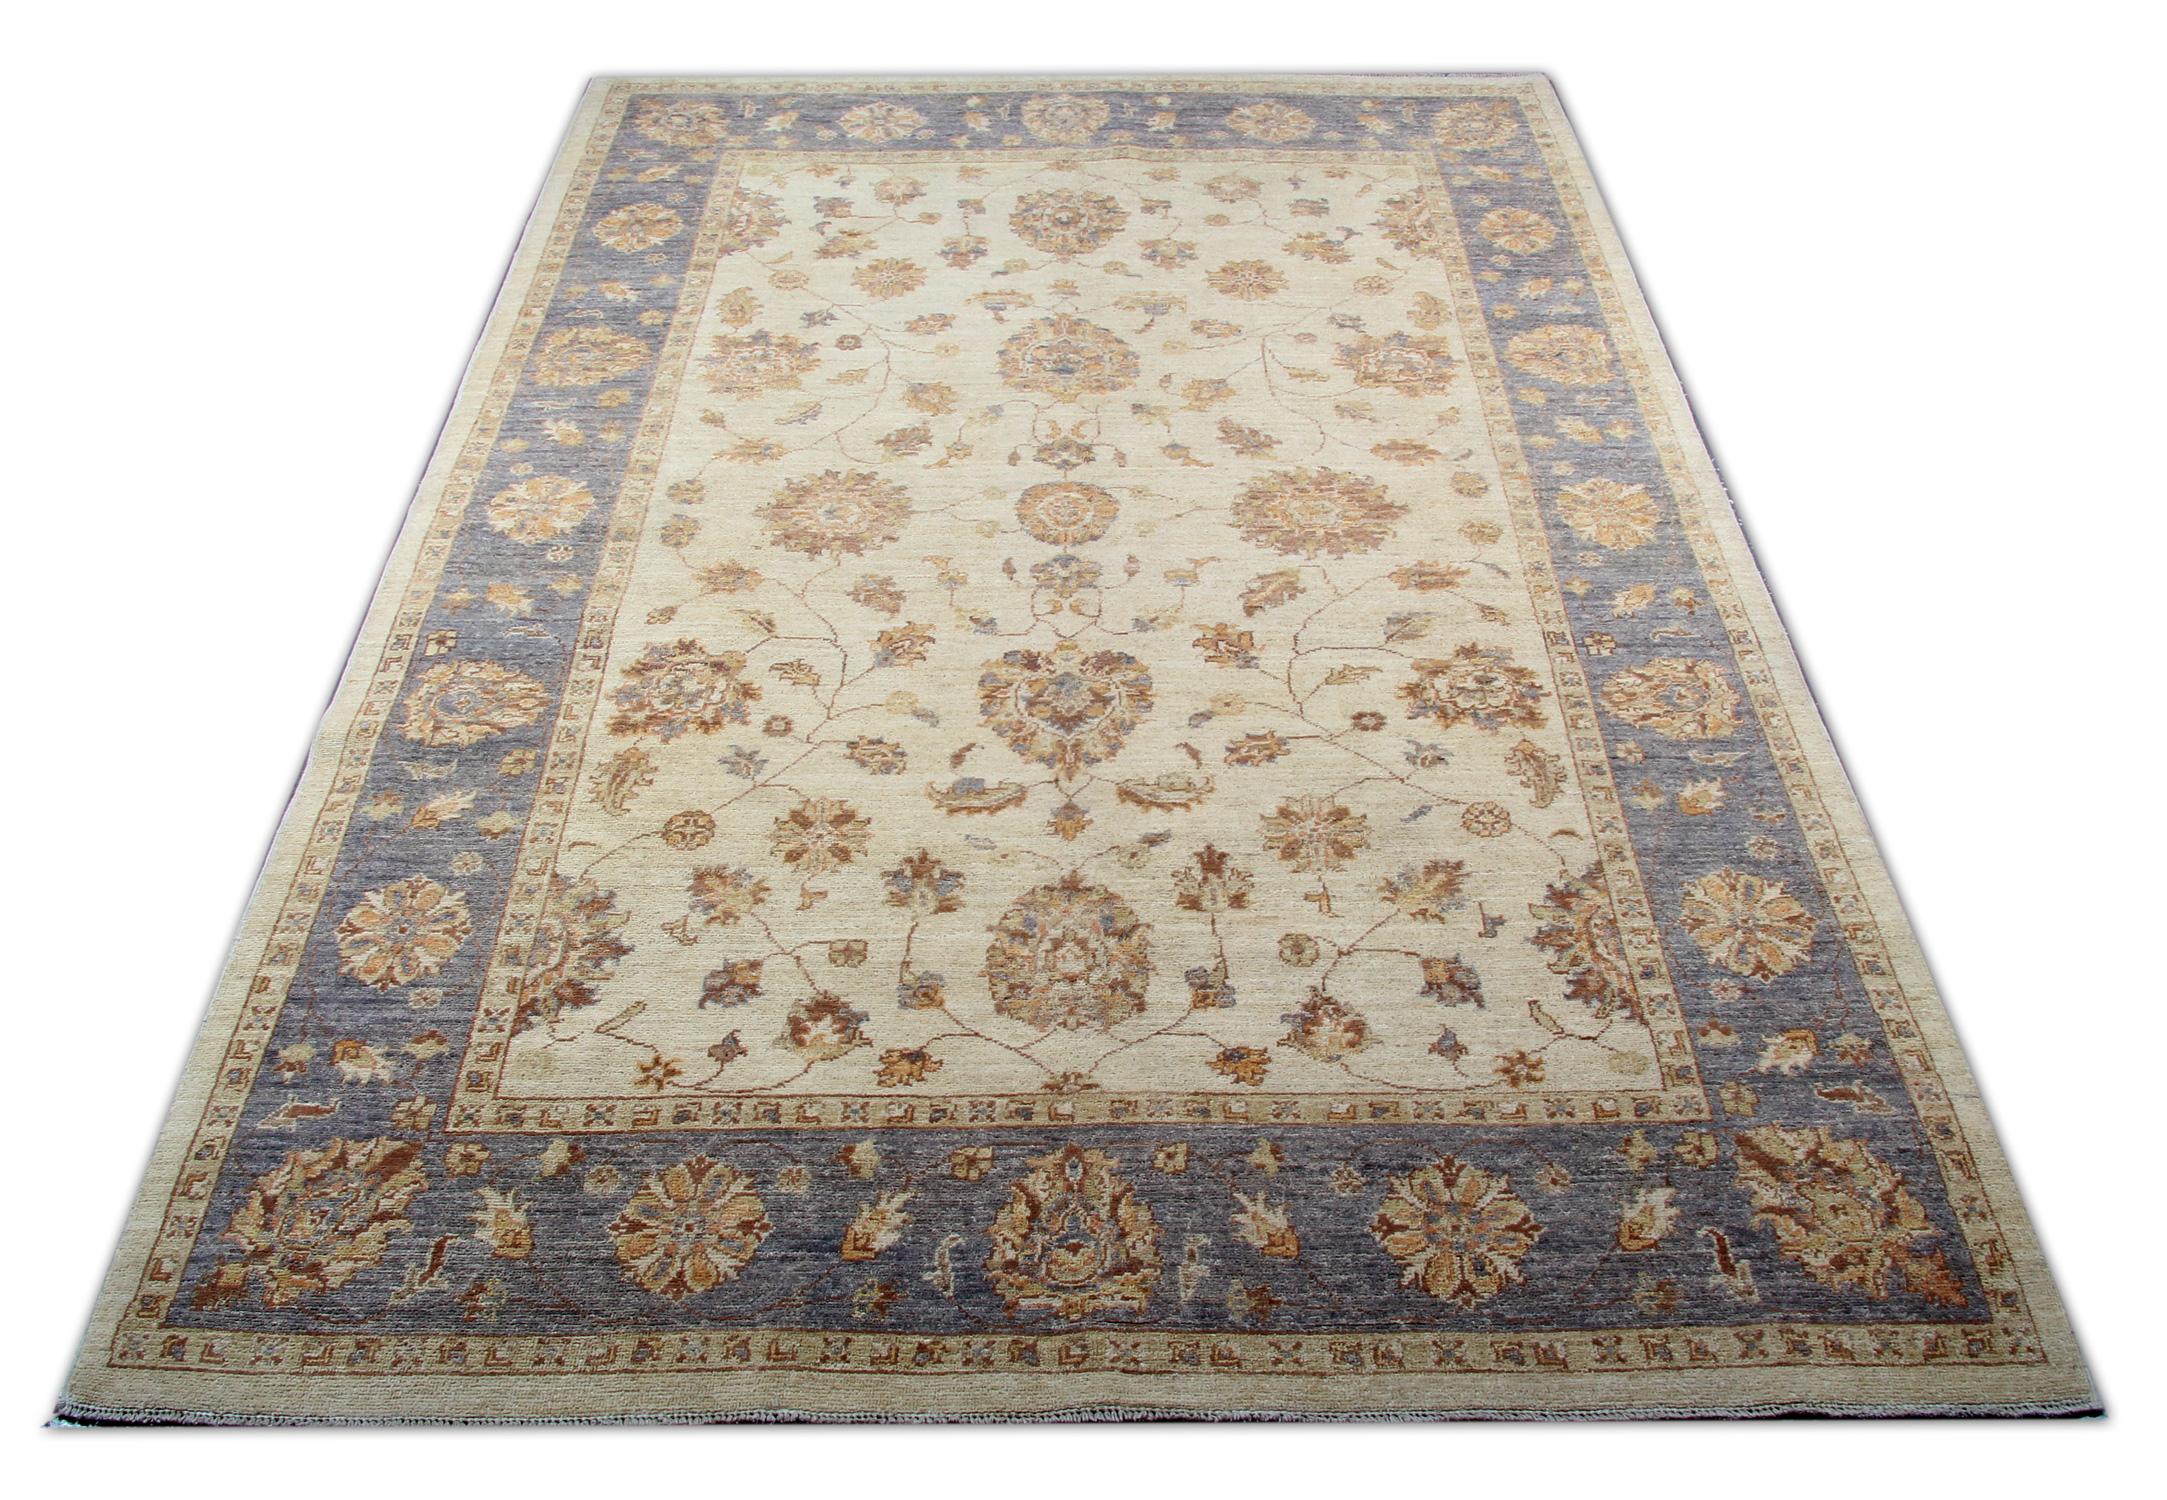 This traditional Ziegler rug is one of our more luxurious rugs made on looms by master weavers of Afghan rugs. This cream rug is made with or all handspun wool, with the colour coming from organic vegetable dyes. This carpet features an all-over